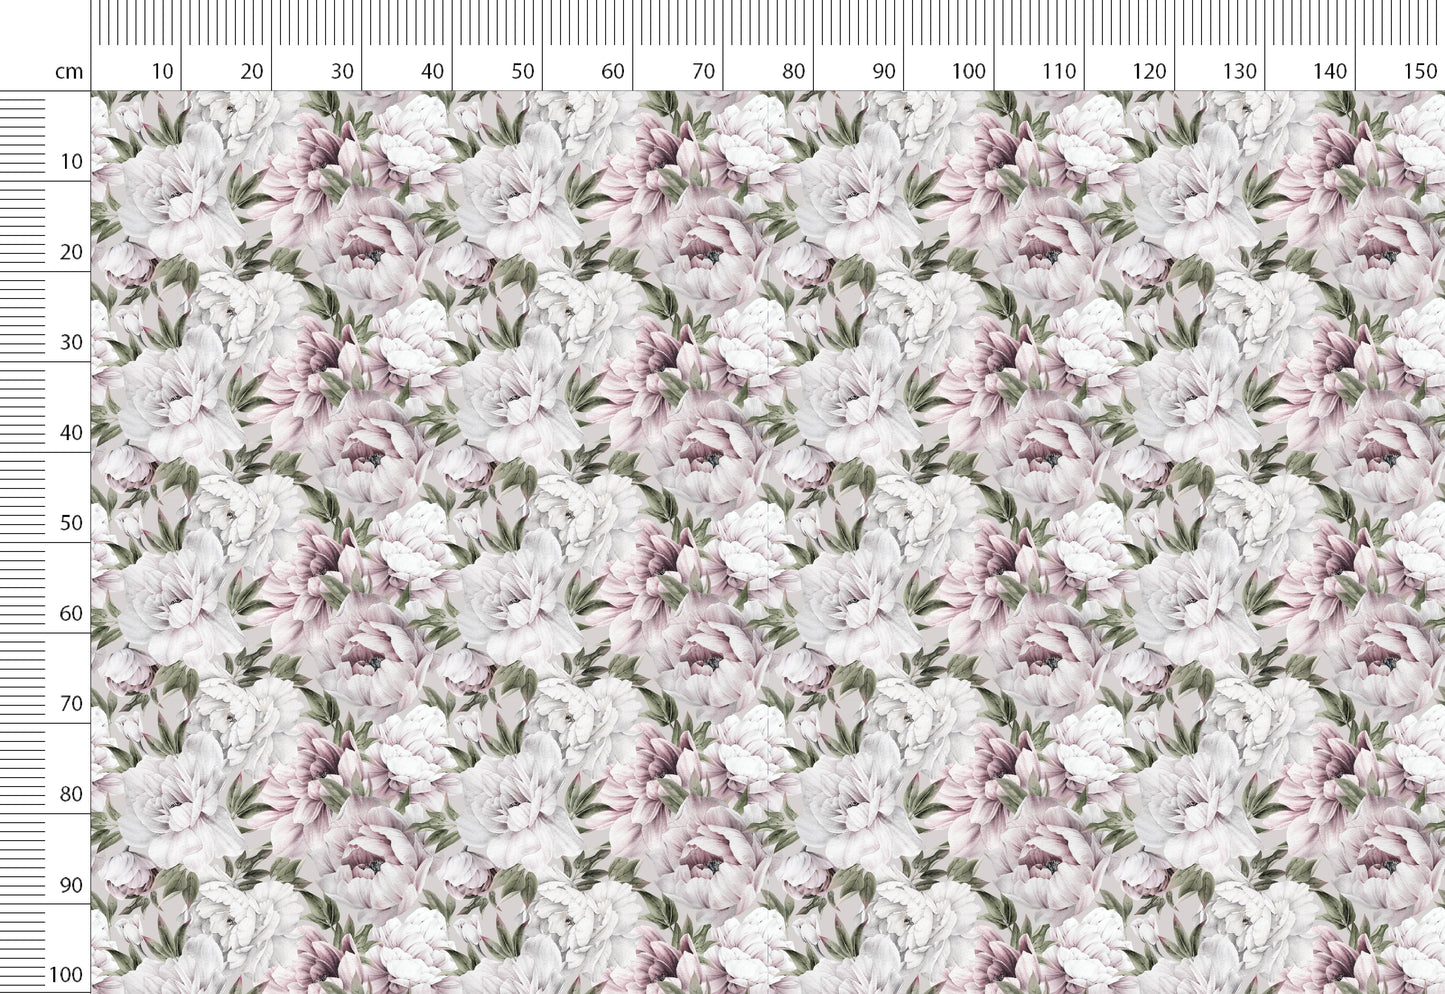 Watercolor Floral Print Linen By The Yard or Meter, Watercolor Peonies Flowers Print Linen Fabric For Clothing, Curtains & Upholstery